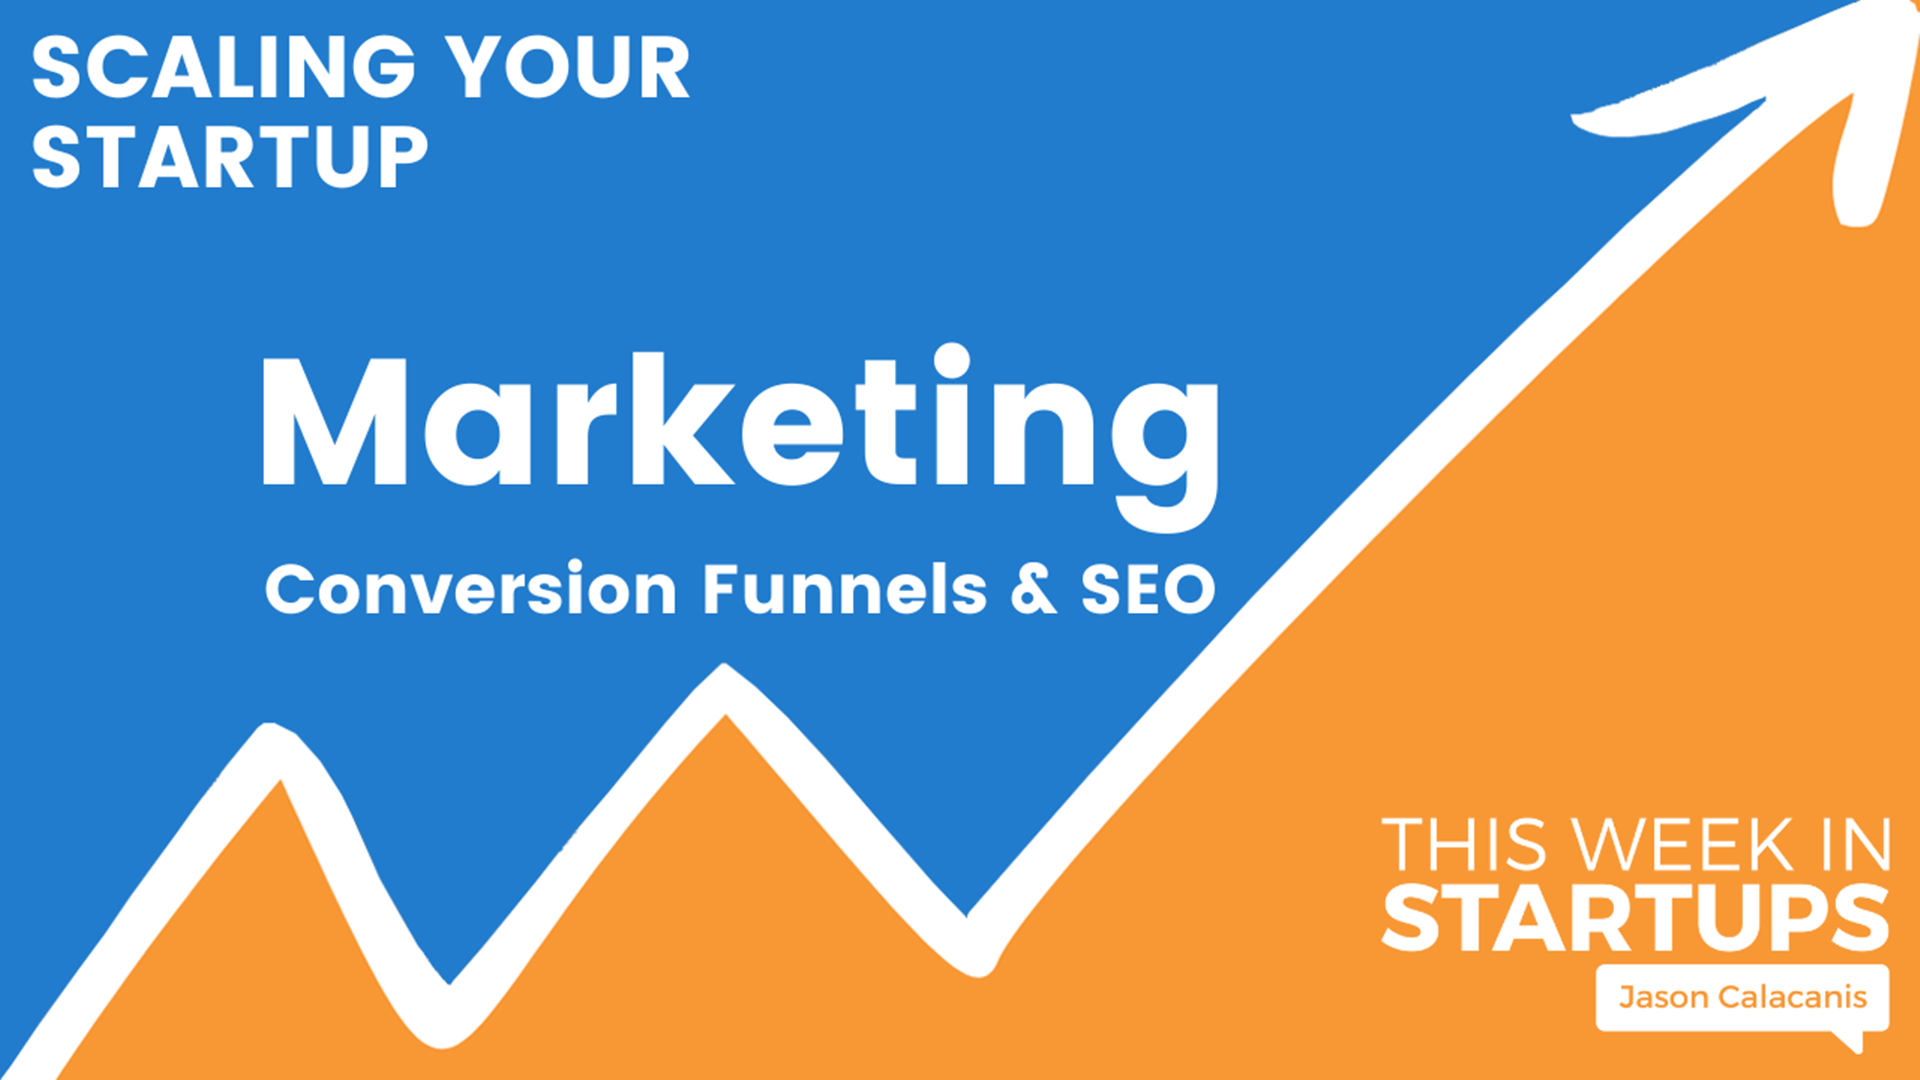 Lessons on Marketing SEO & Conversion | Scaling Your Startup S2 E6